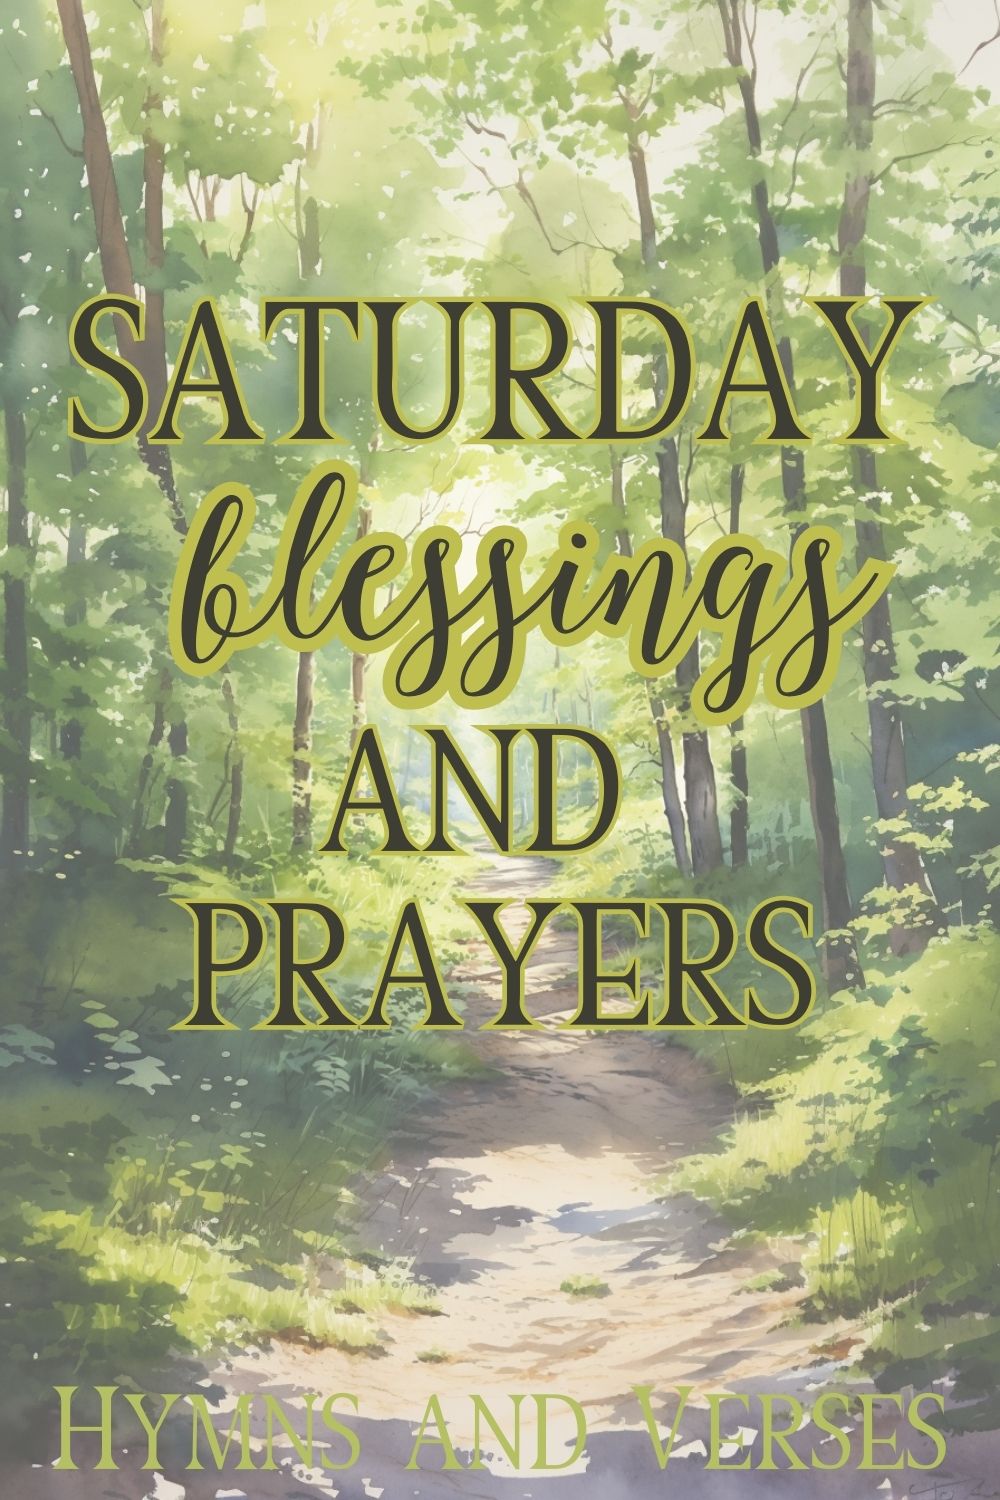 pinterest pin about Saturday Blessings and prayers featuring watercolor picture of a walk in the forest on a bright sunny Saturday